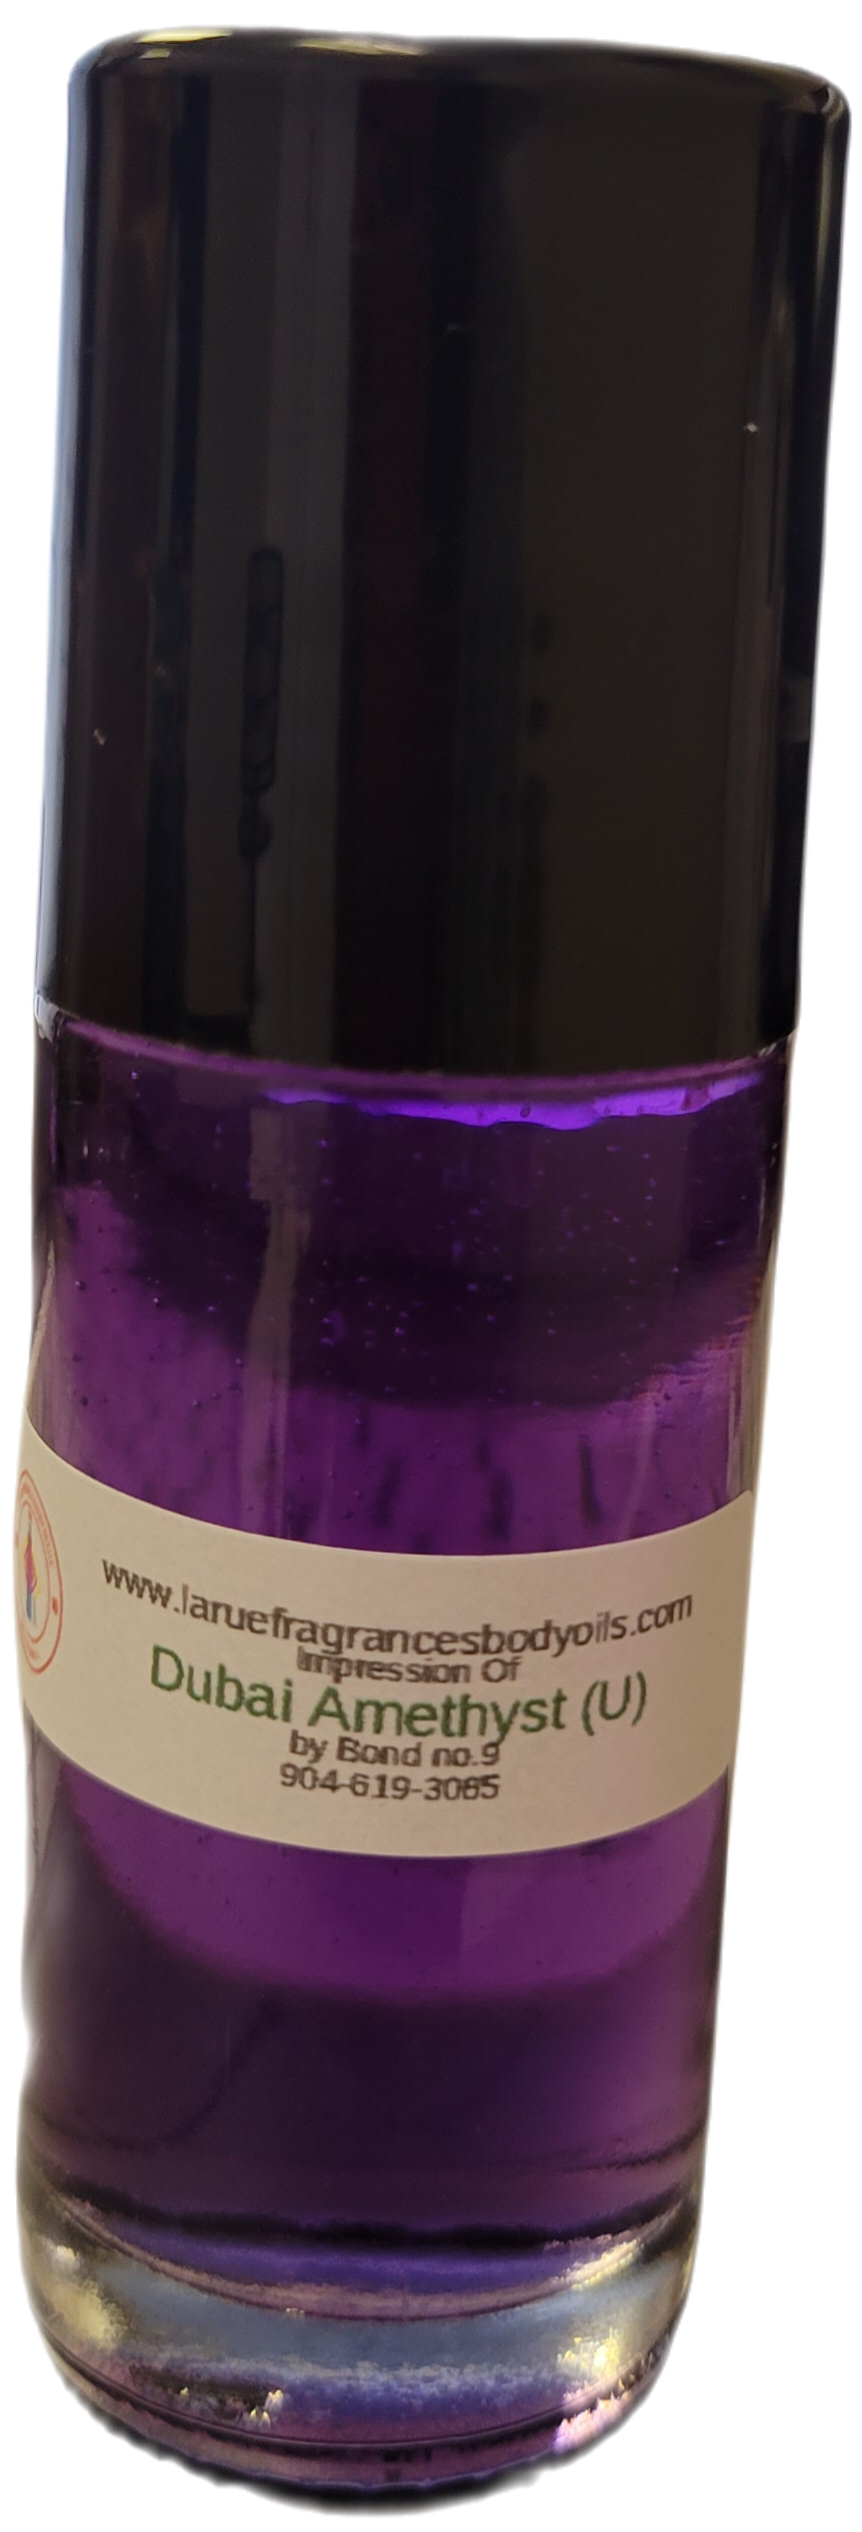 Our Impression of Dubai Amethyst Bond no.9 1.3oz Large Roll On Bottle perfume cologne fragrance body oil. Alcohol-Free (Unisex)